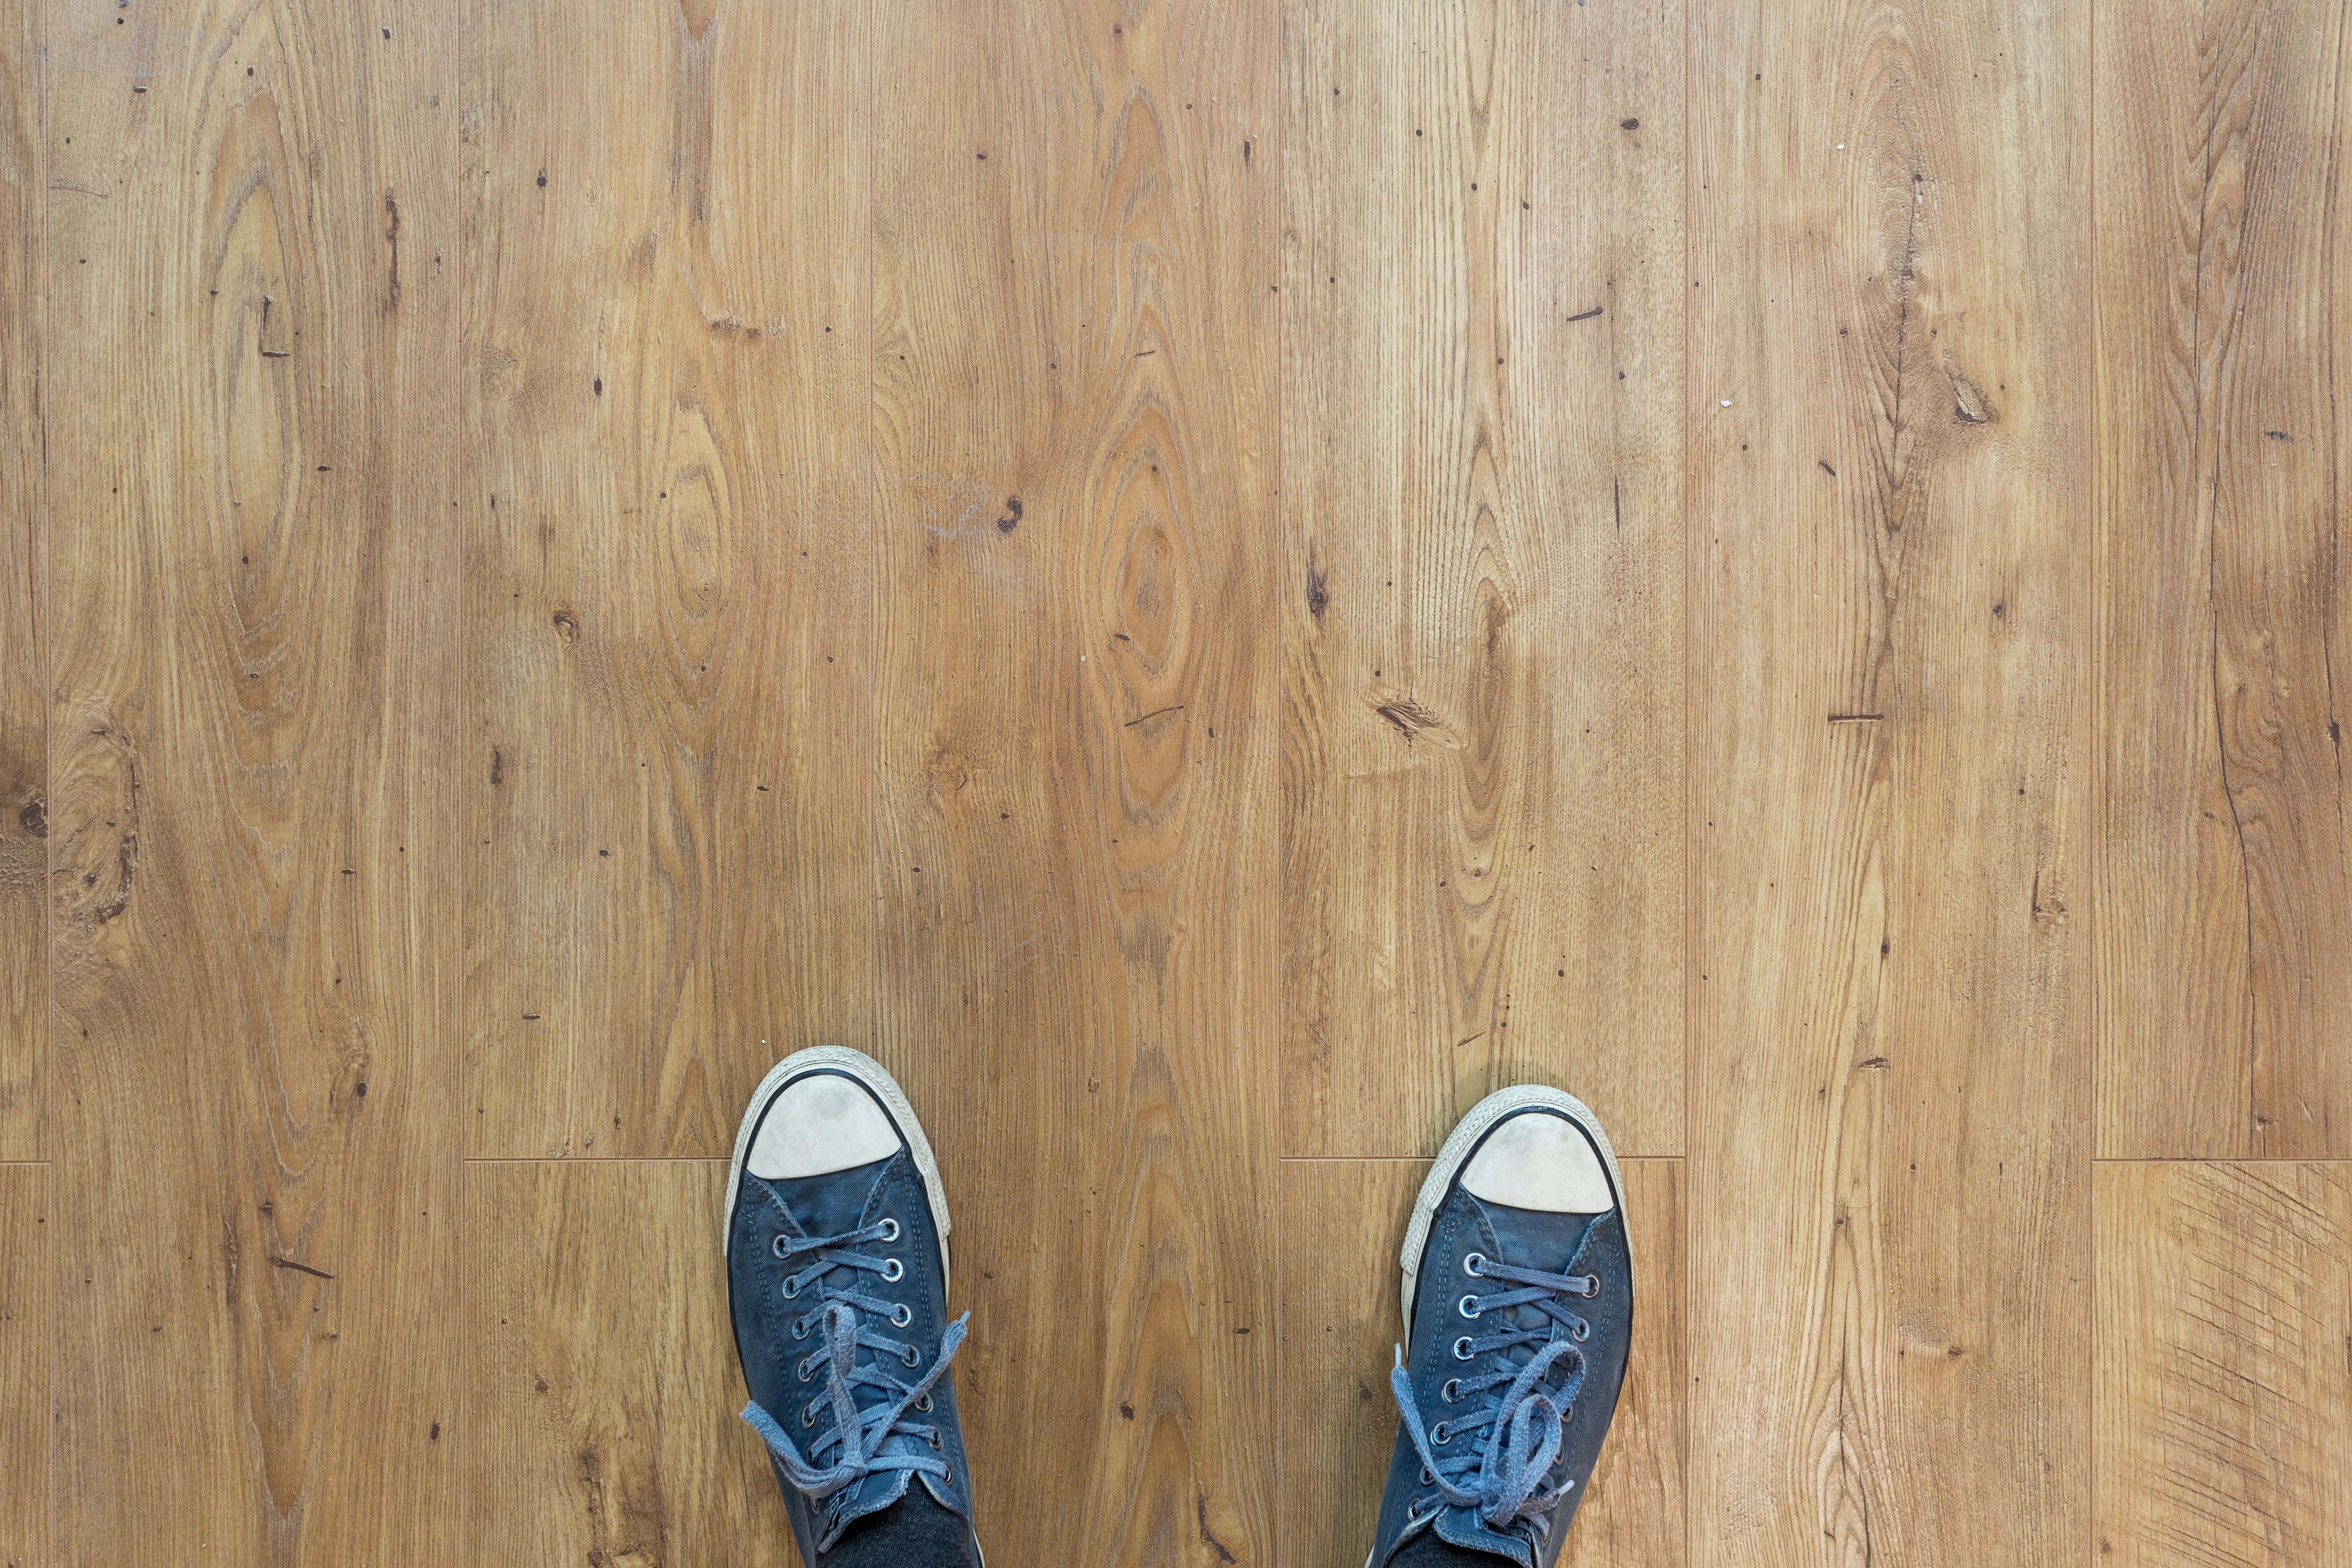 When & How to Redo Your Flooring